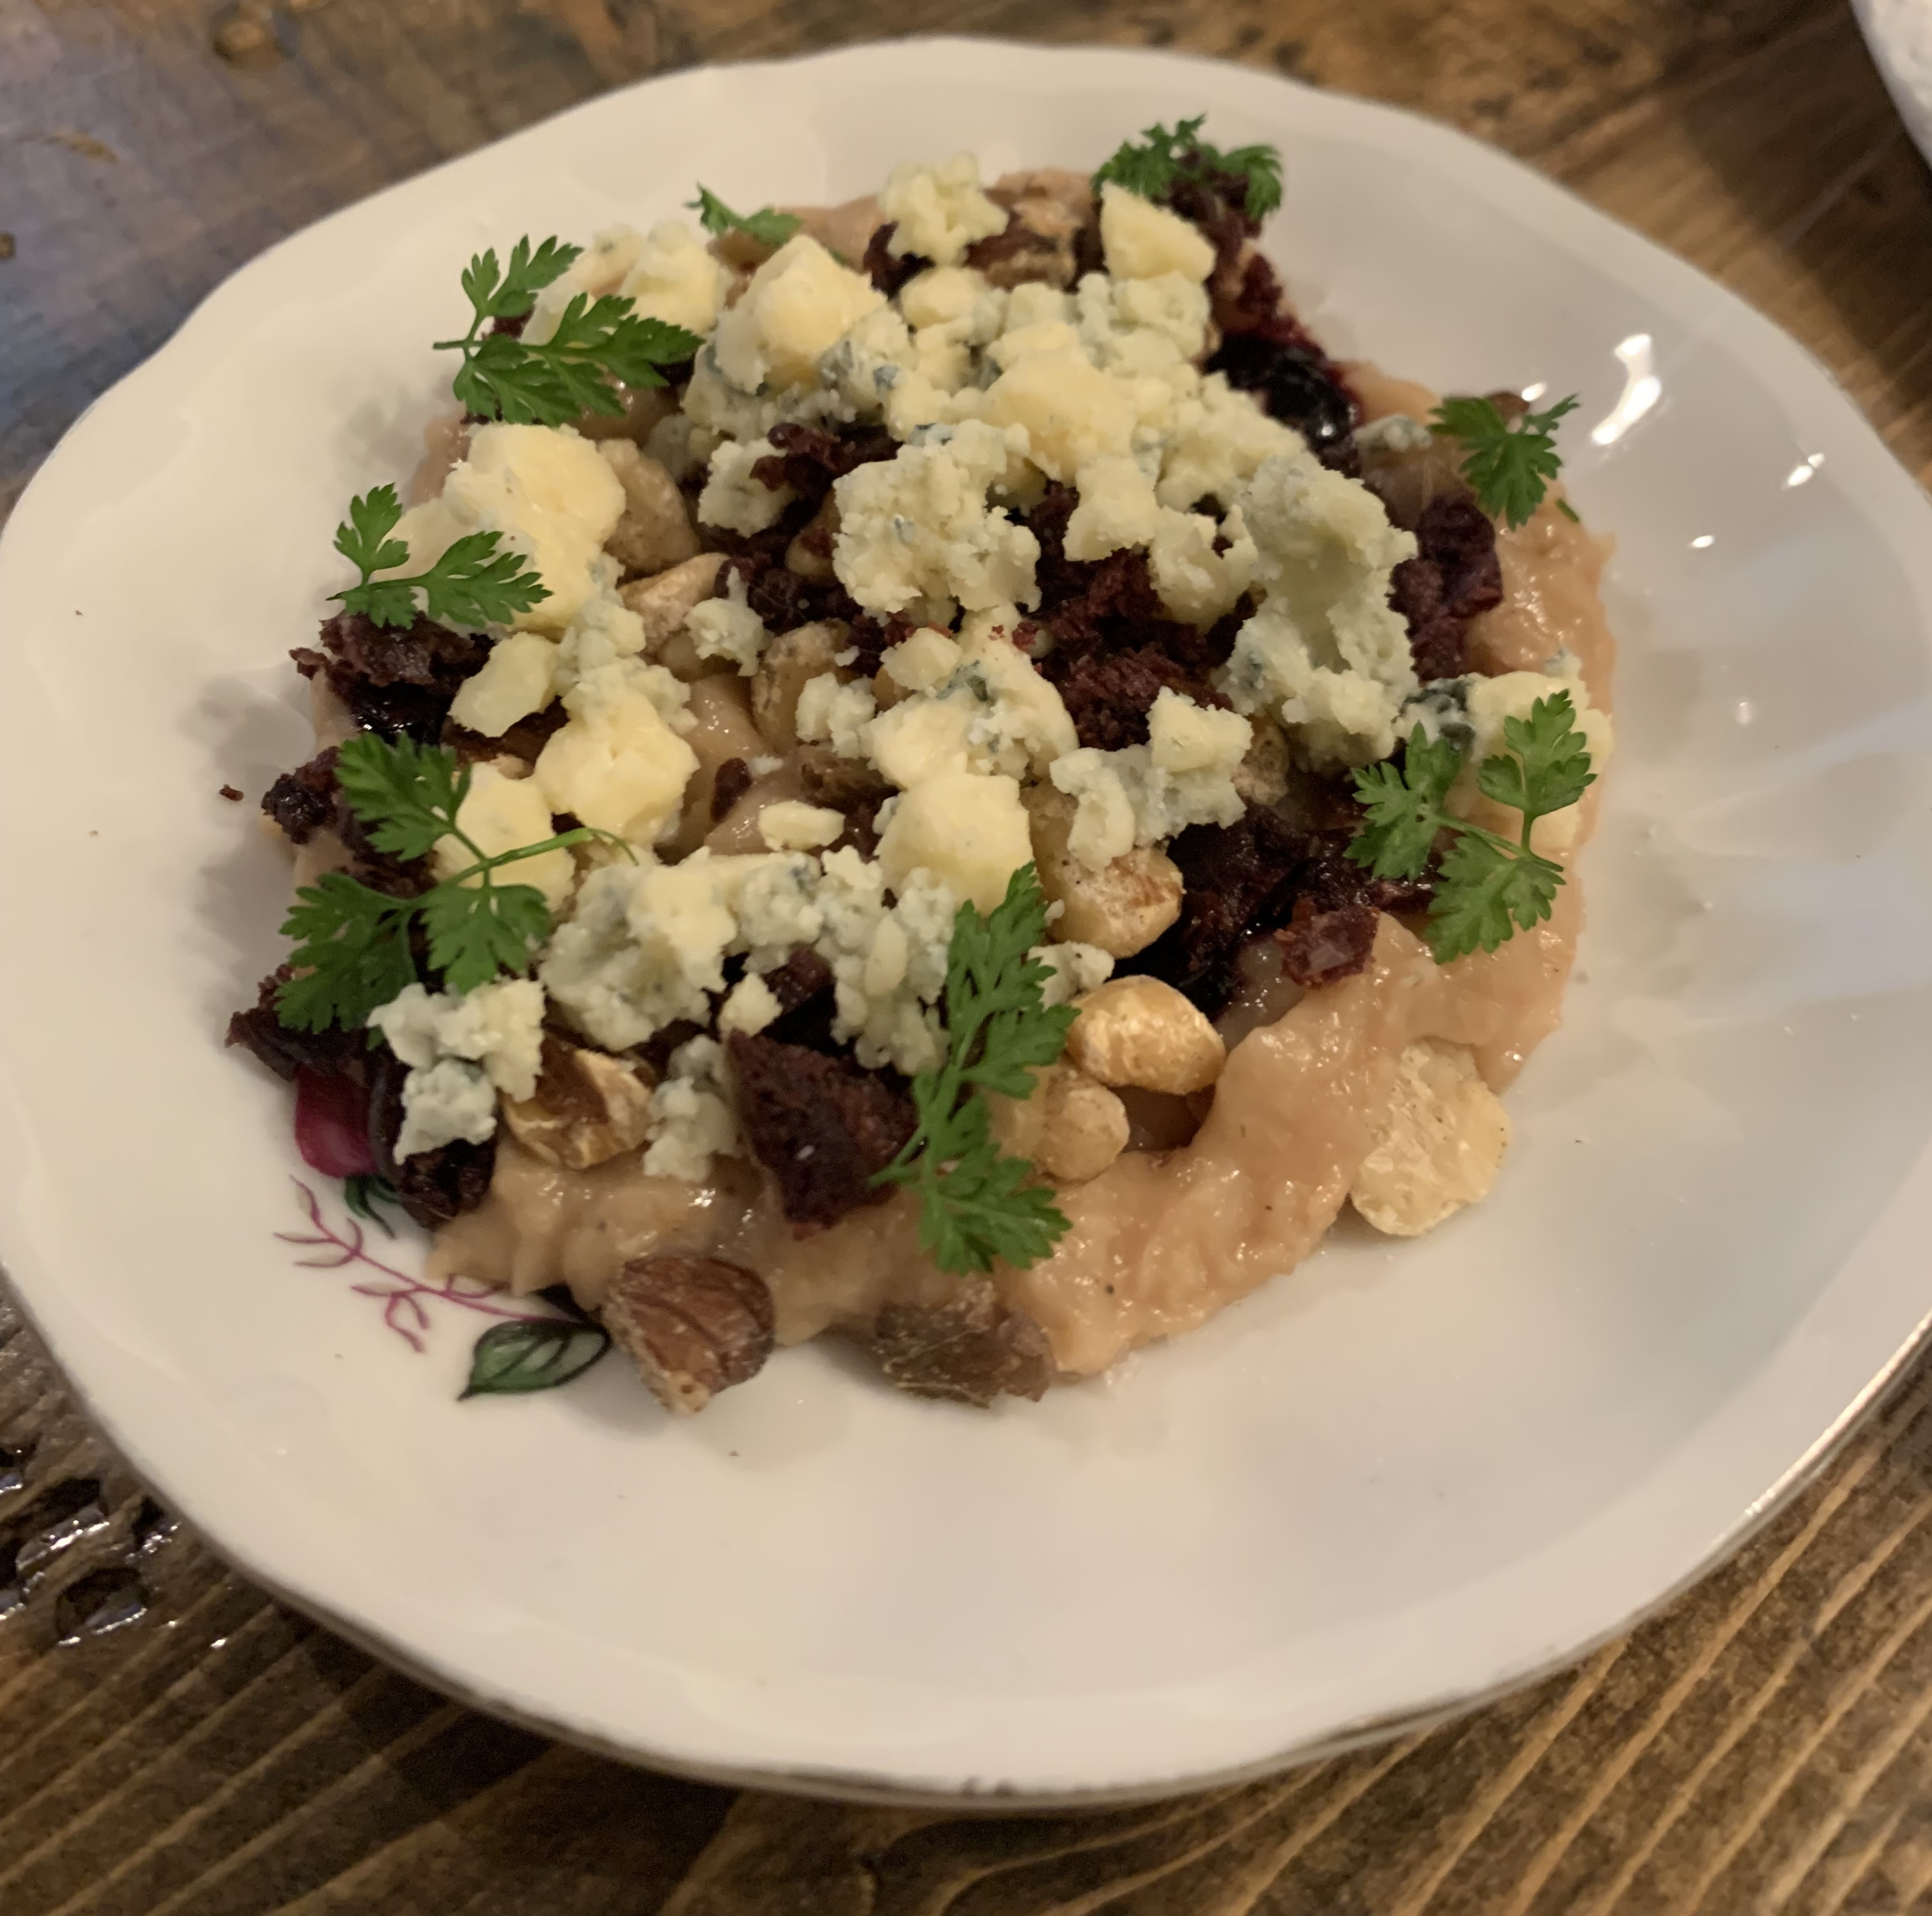 Mashed white bean dip base, with blue cheese crumbles, tiny sprigs of herbs, little bits of walnuts, and dried bits of raspberry on top of it.